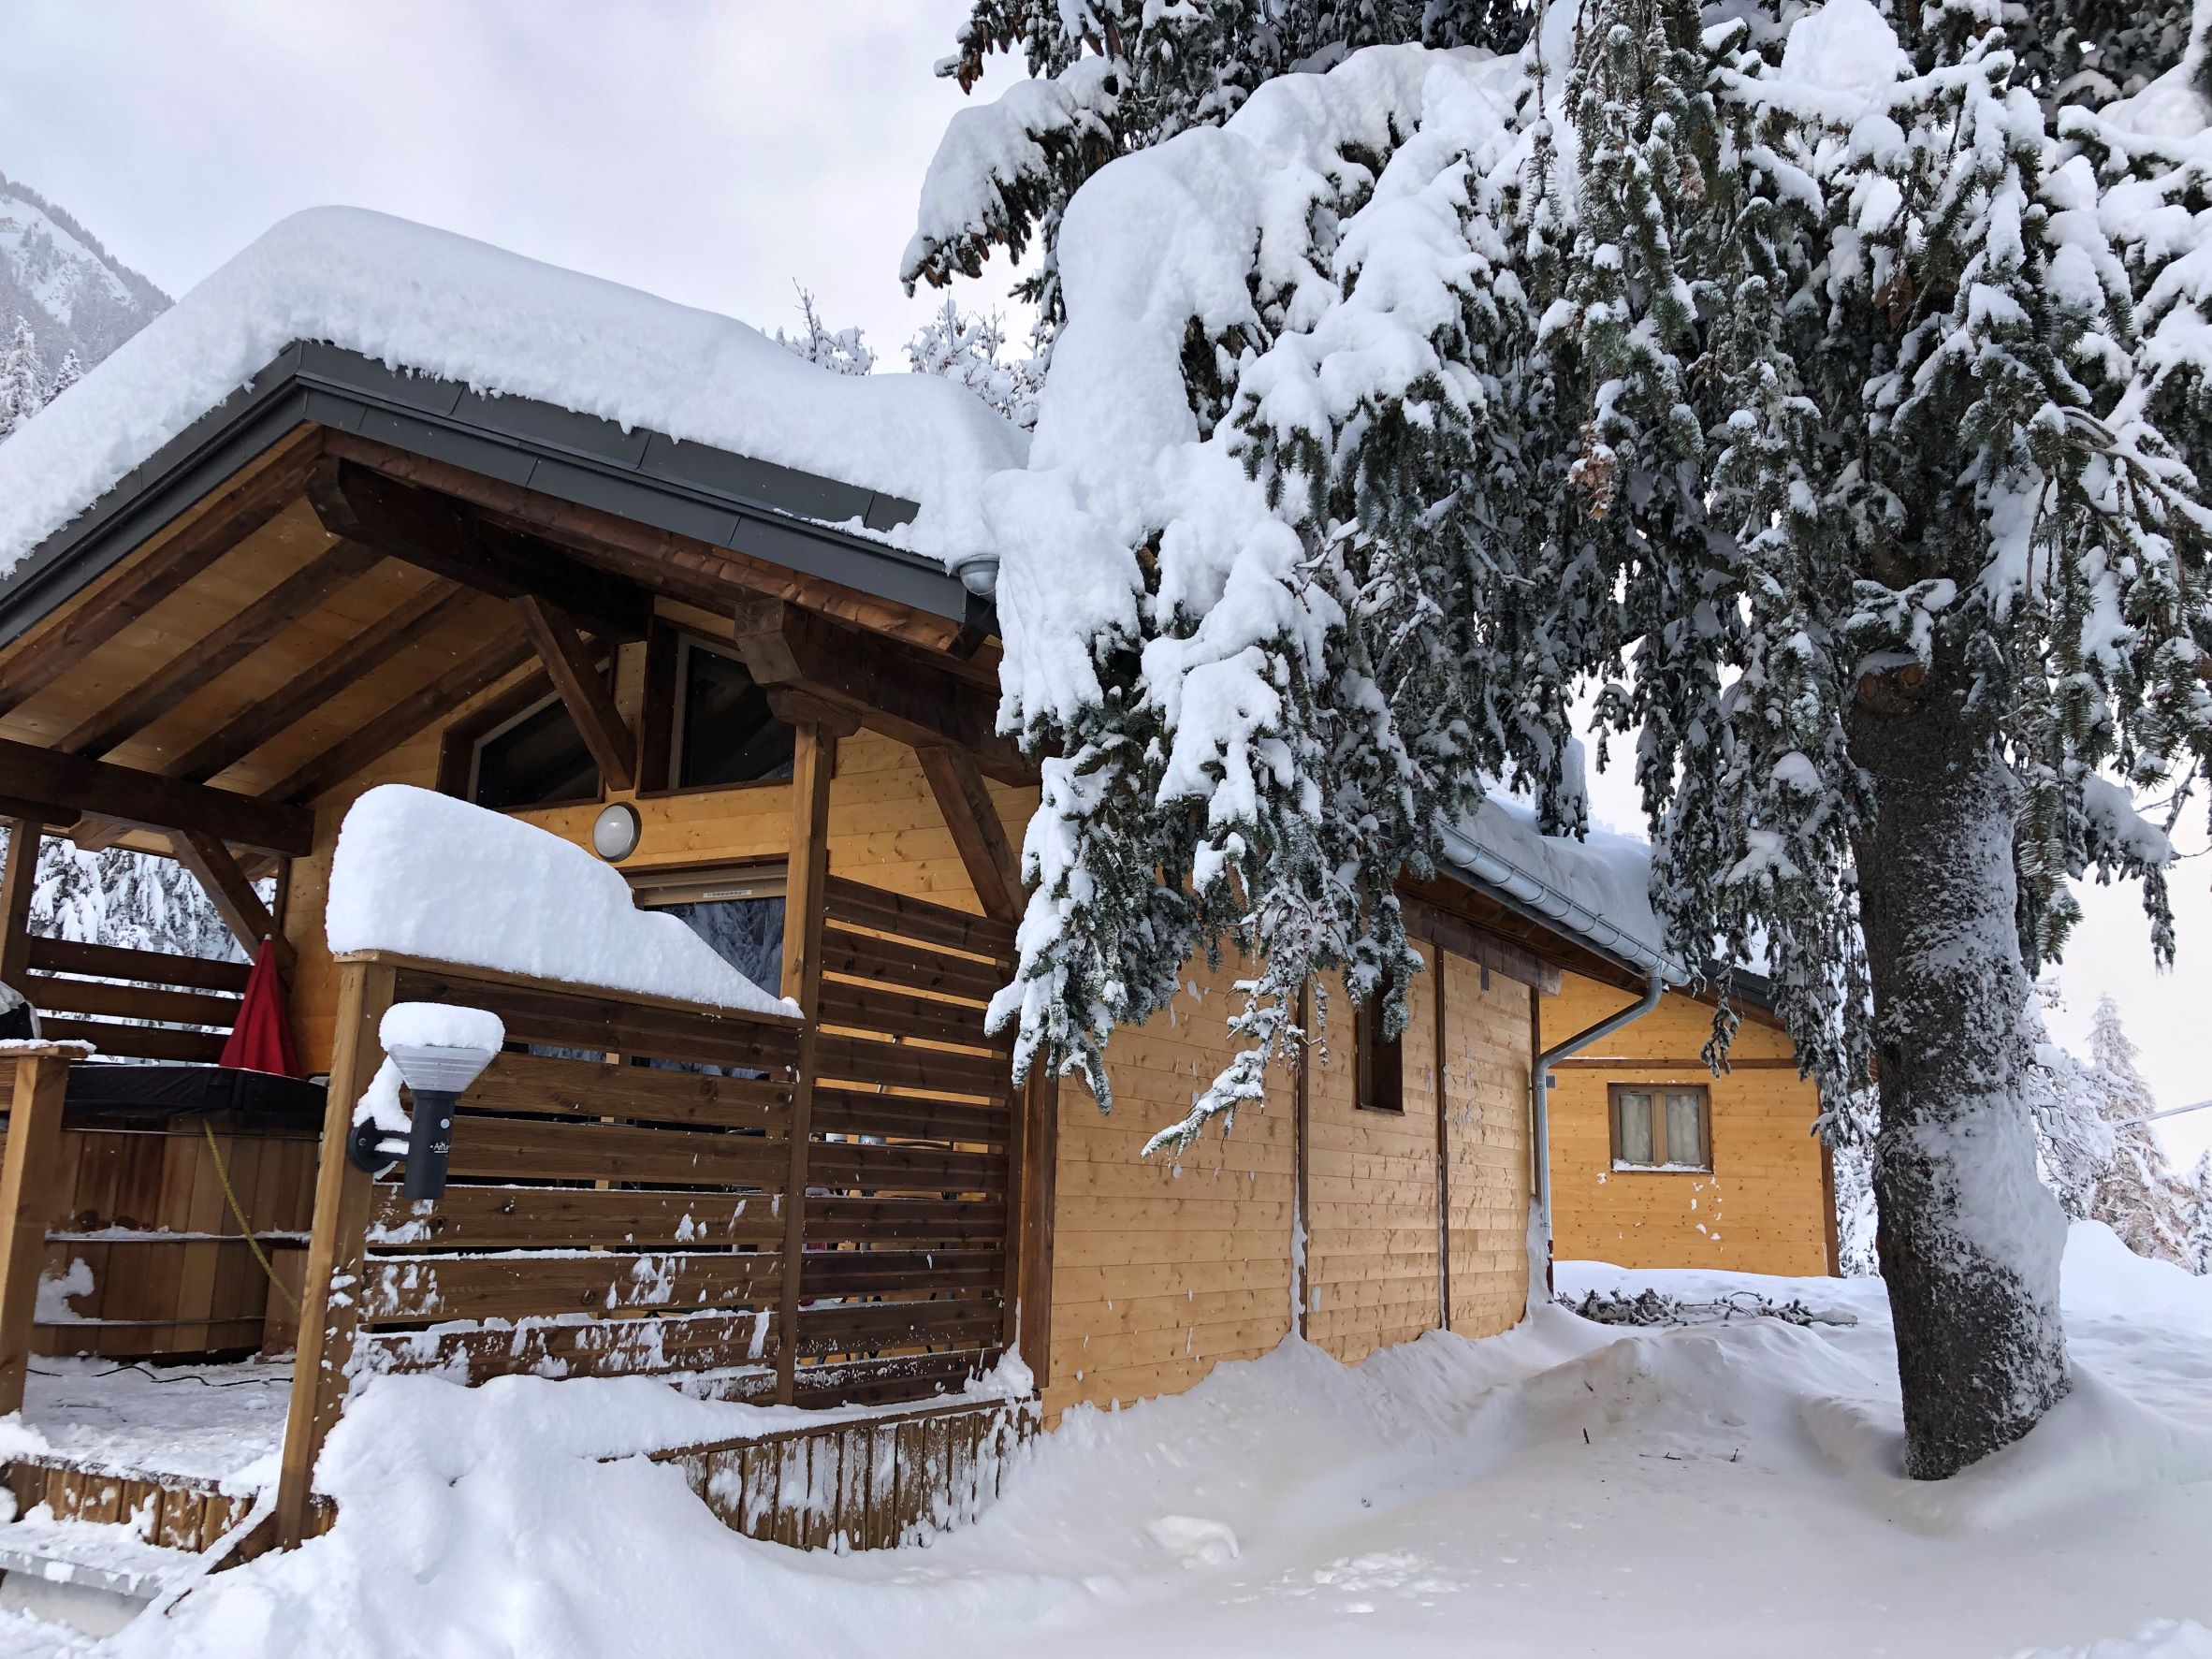 Gamme Chrystal - Chalet Hermine 24 m² 1 bedroom + semi-covered terrace 12m² with Nordic bath